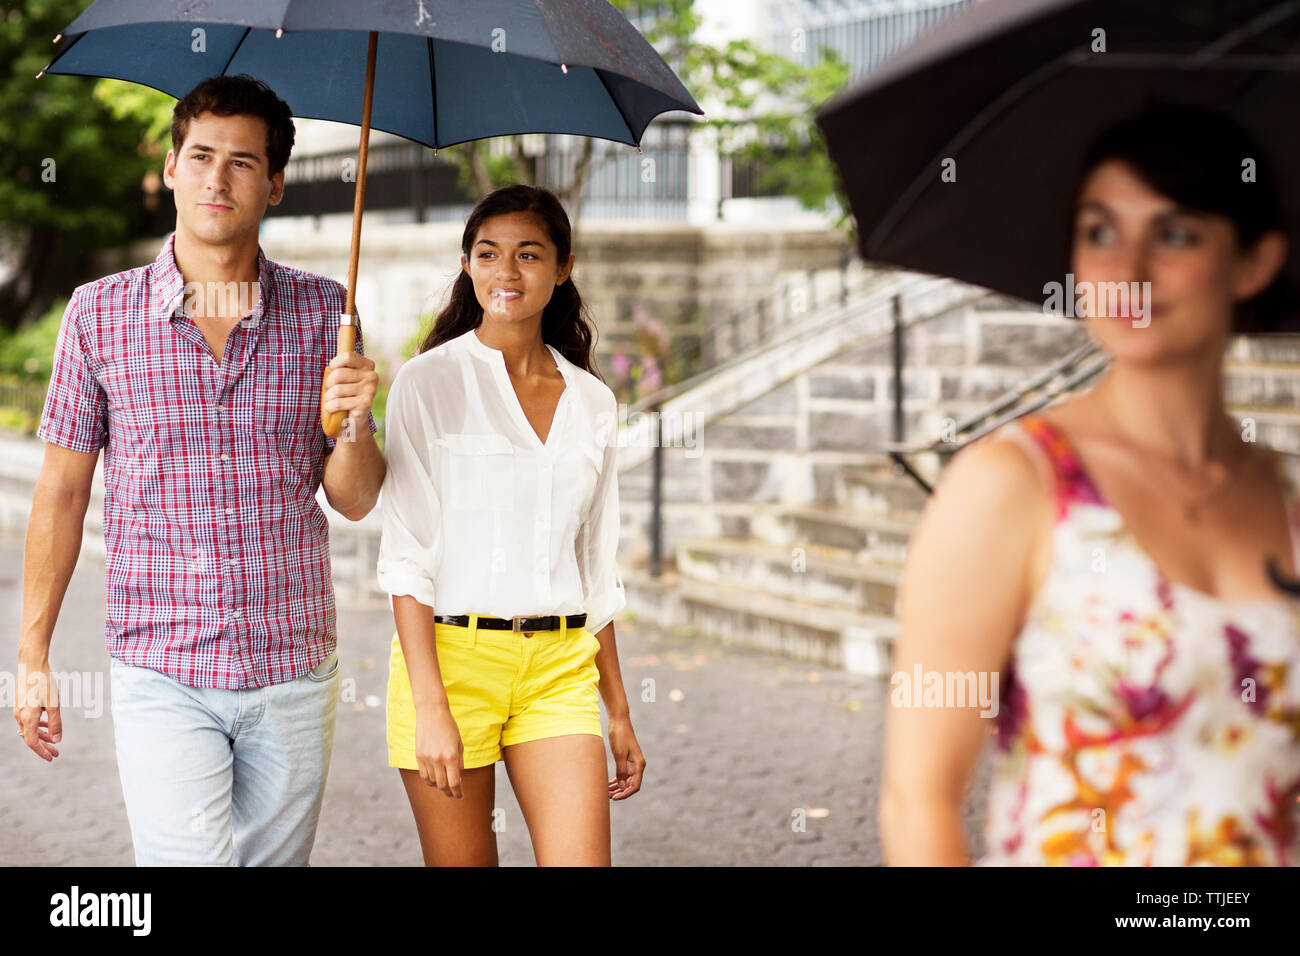 Friends carrying umbrella while walking on footpath in city Stock Photo